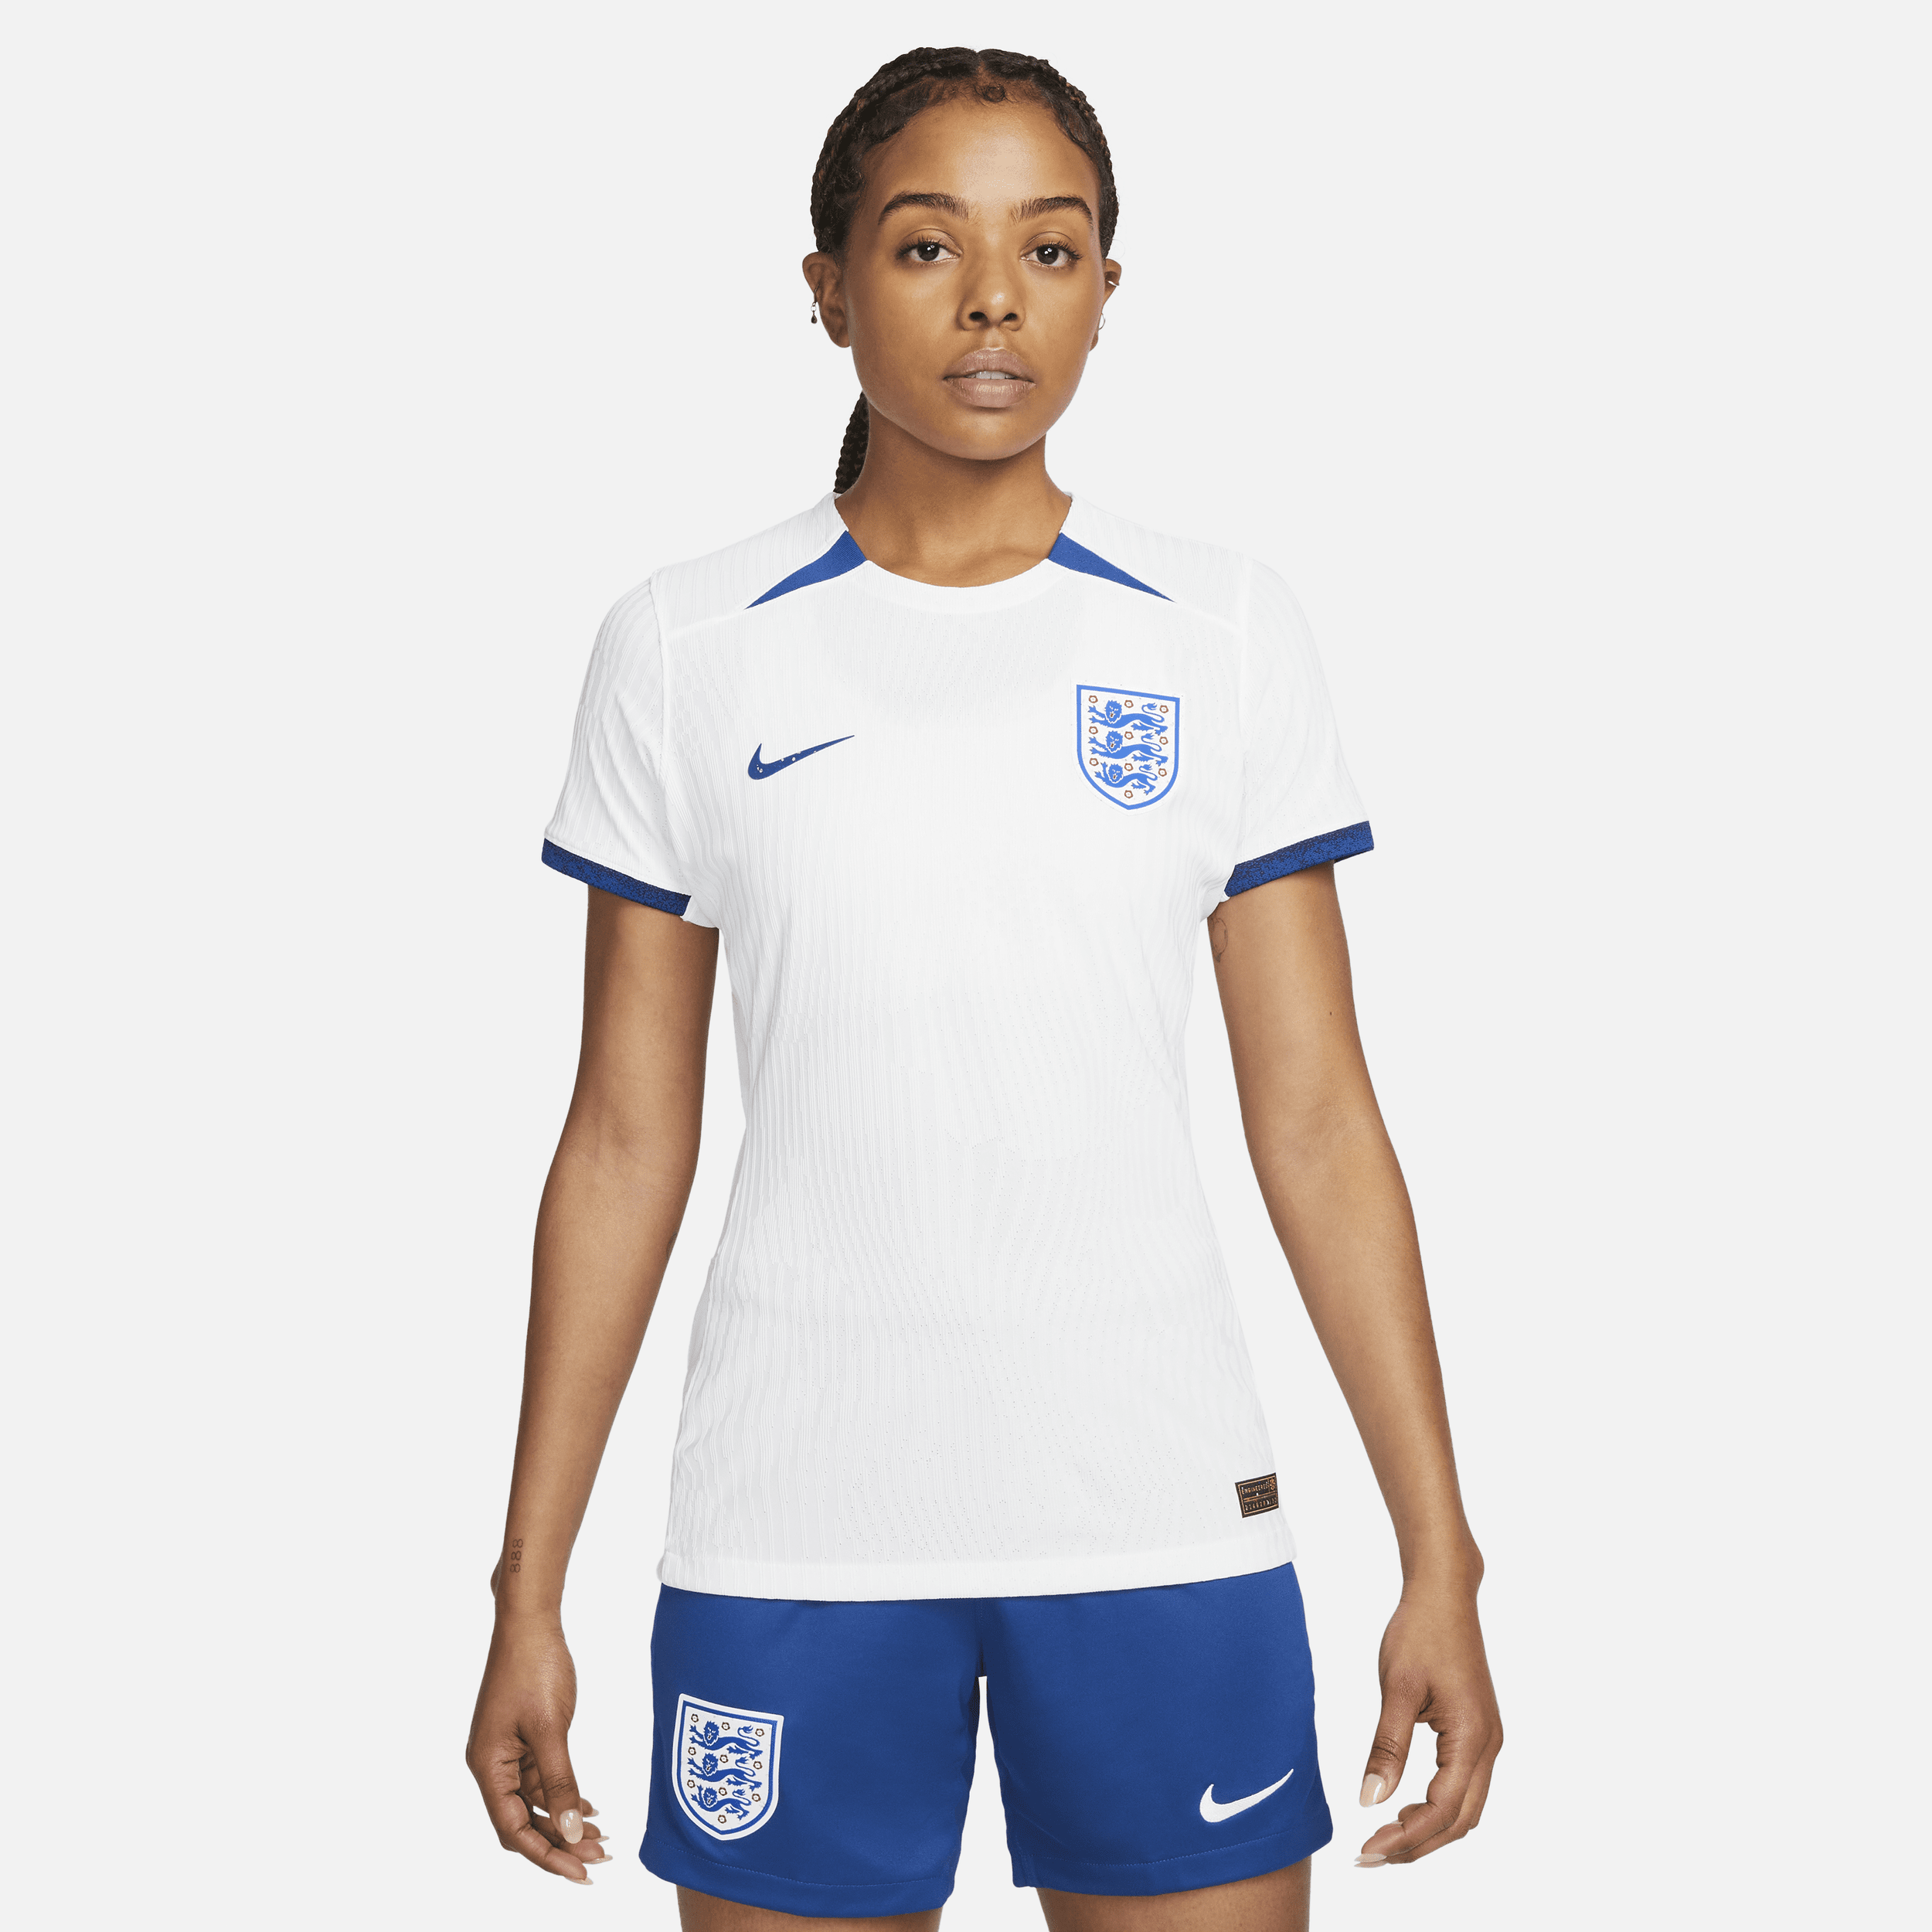 England 2023 Lionesses Engeland Match Thuis Nike Dri-FIT ADV voetbalshirt voor dames - Wit